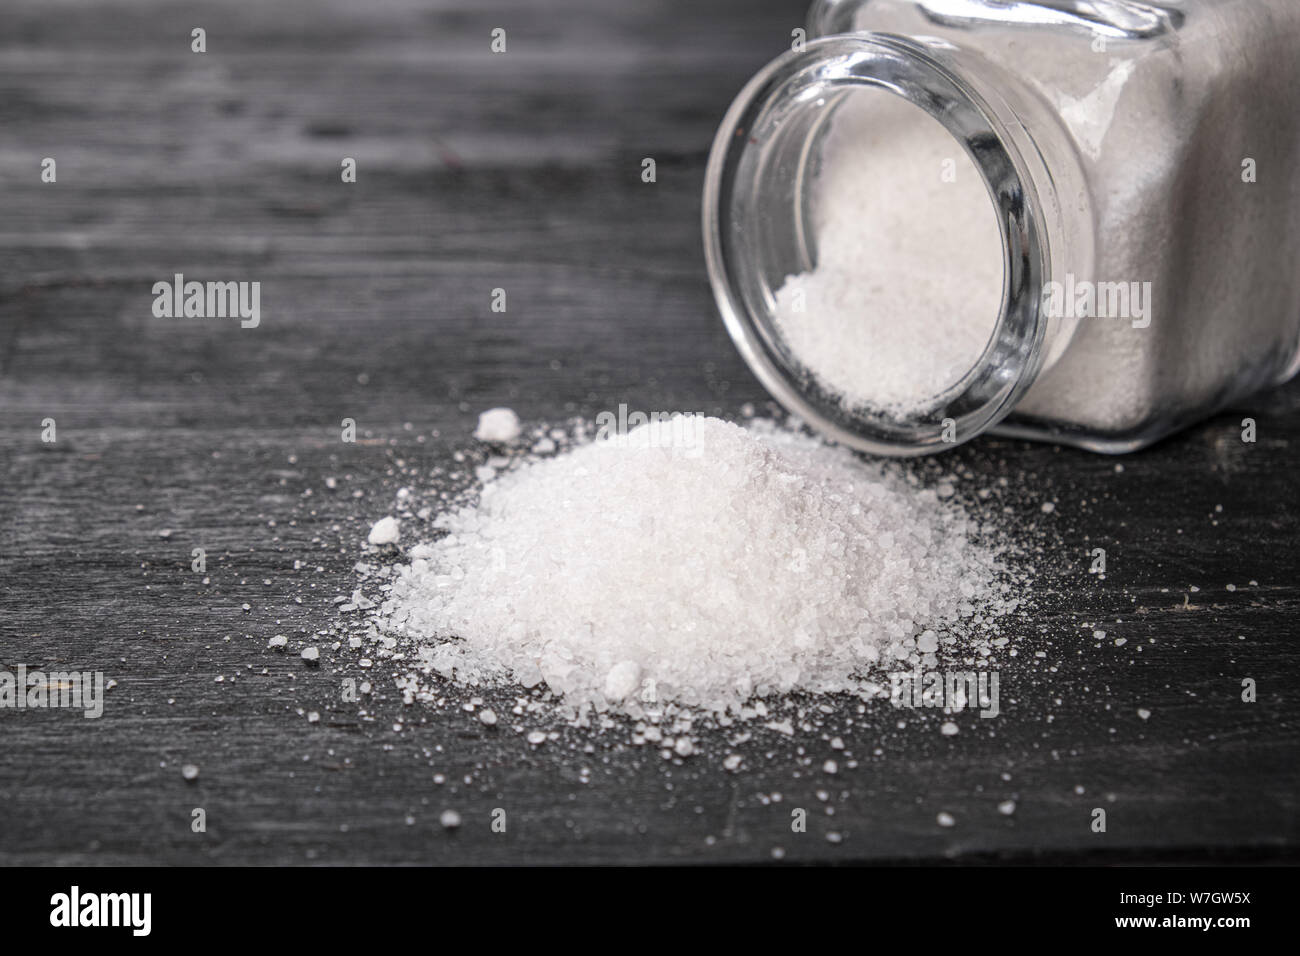 Sea salt in dark backfround, close-up view. Bunch of salt on dark wood table, concept of healthy nutrition concerns, eating habits. Stock Photo